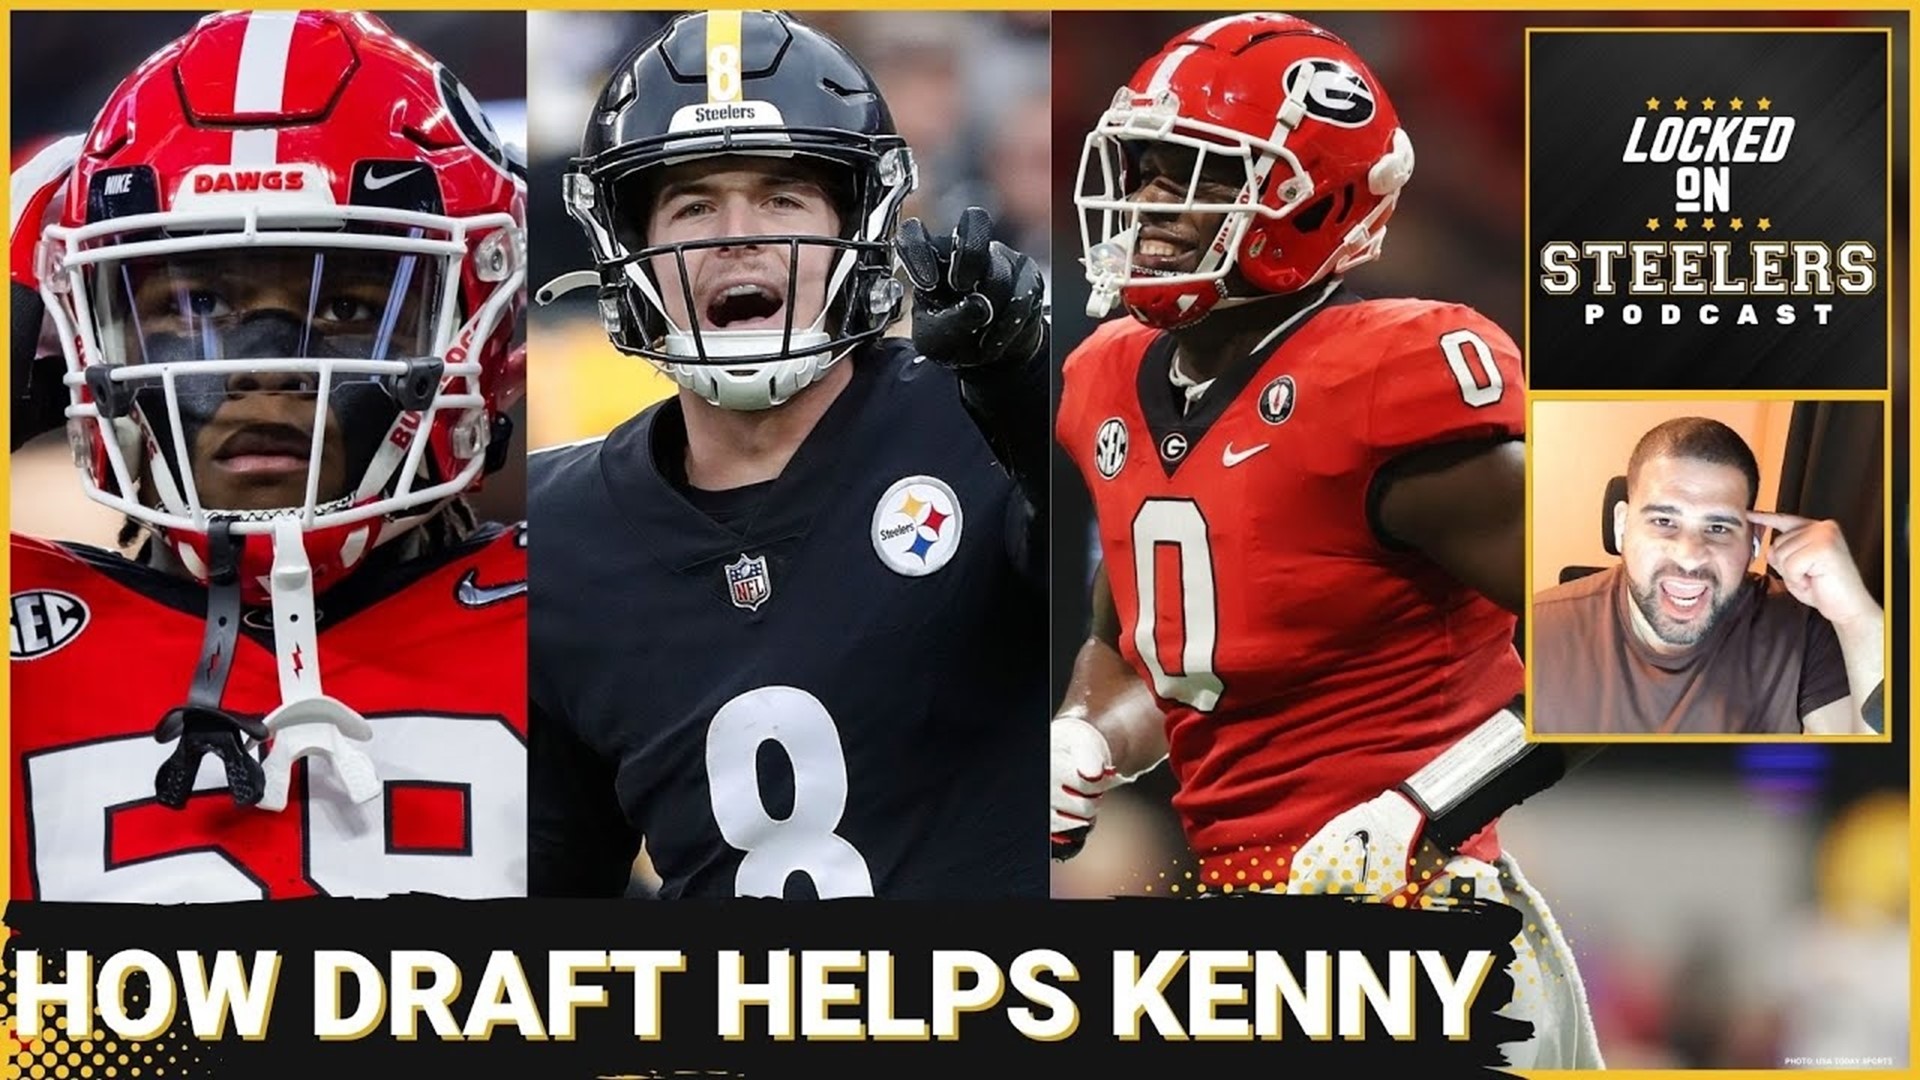 The Pittsburgh Steelers' 2023 NFL Draft class added offensive talents like Broderick Jones and Darnell Washington. But what do they do to help Kenny Pickett develop?